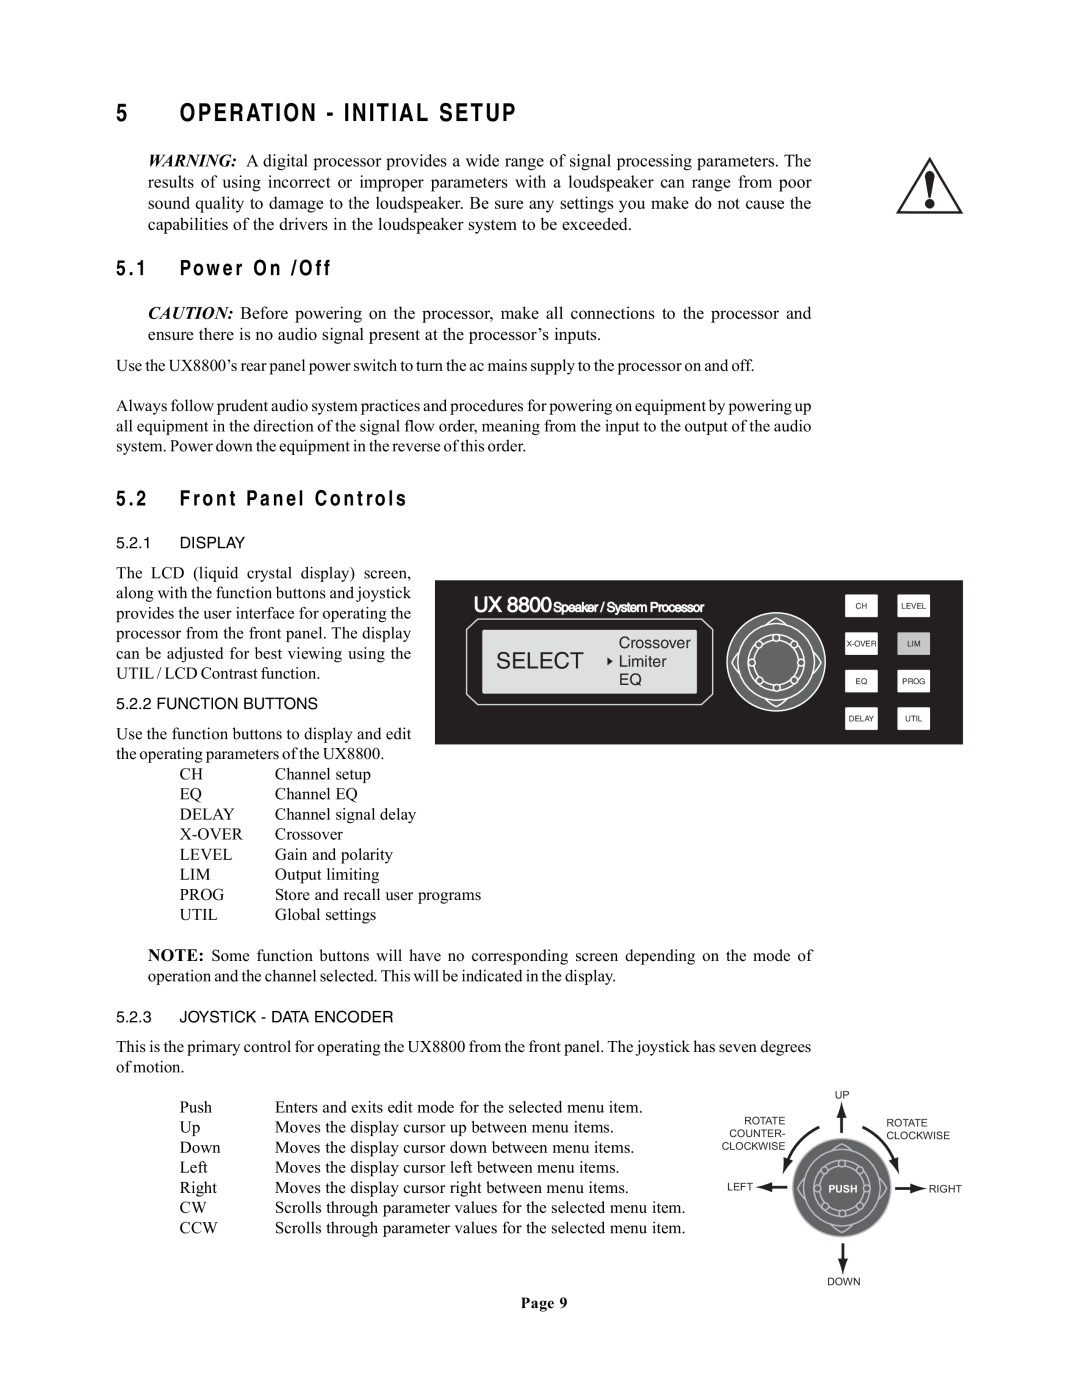 EAW UX8800 owner manual Operation - Initial Setup, 5 . 1 Power On /Off, 5 . 2 Front Panel Controls 